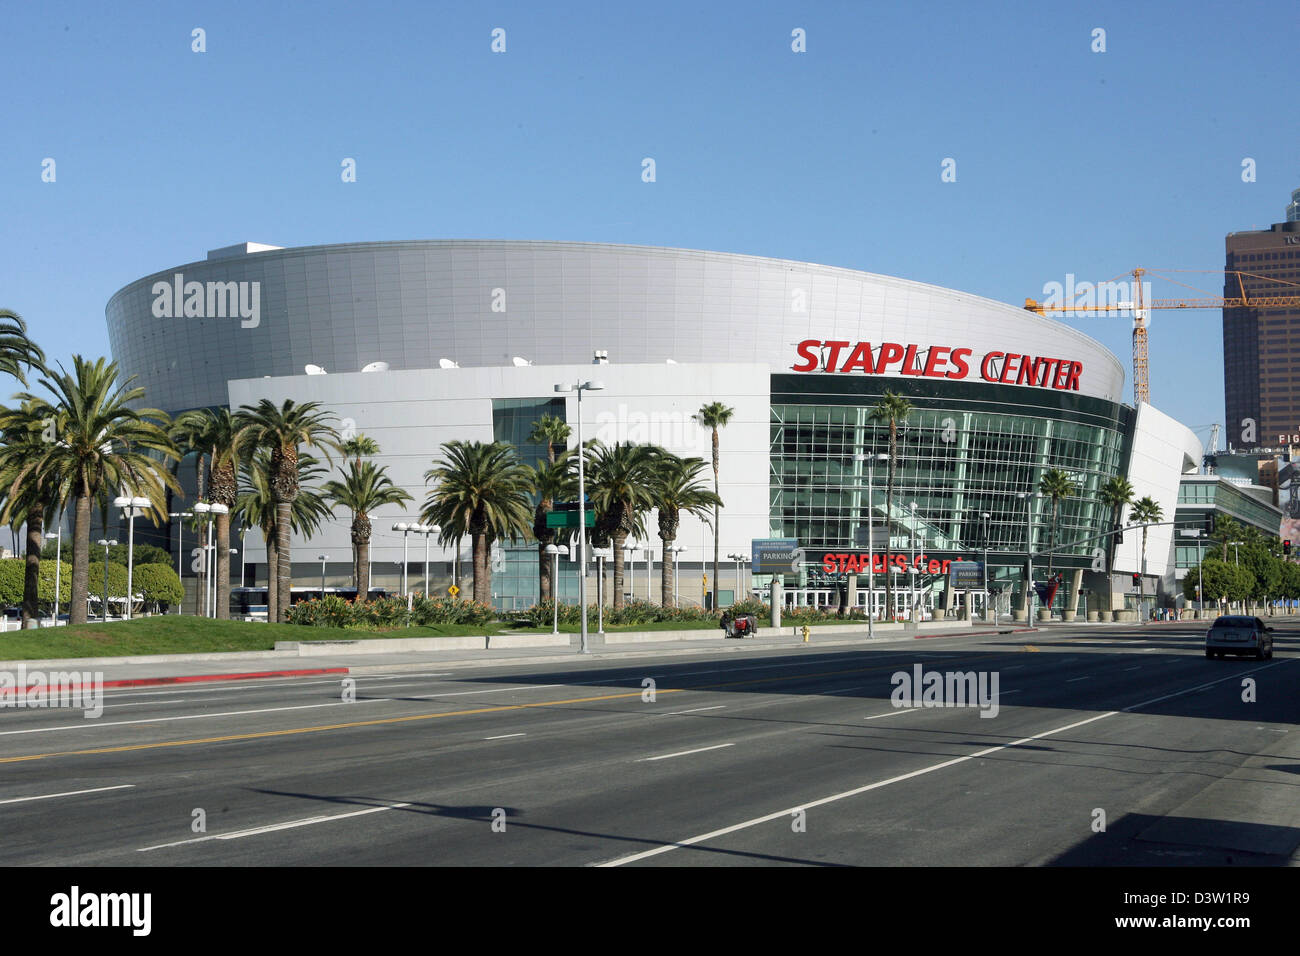 The picture shows the  Staples Center that houses among others sports events, Los Angeles, California, USA, 28 November 2006. Photo: Uli Deck Stock Photo